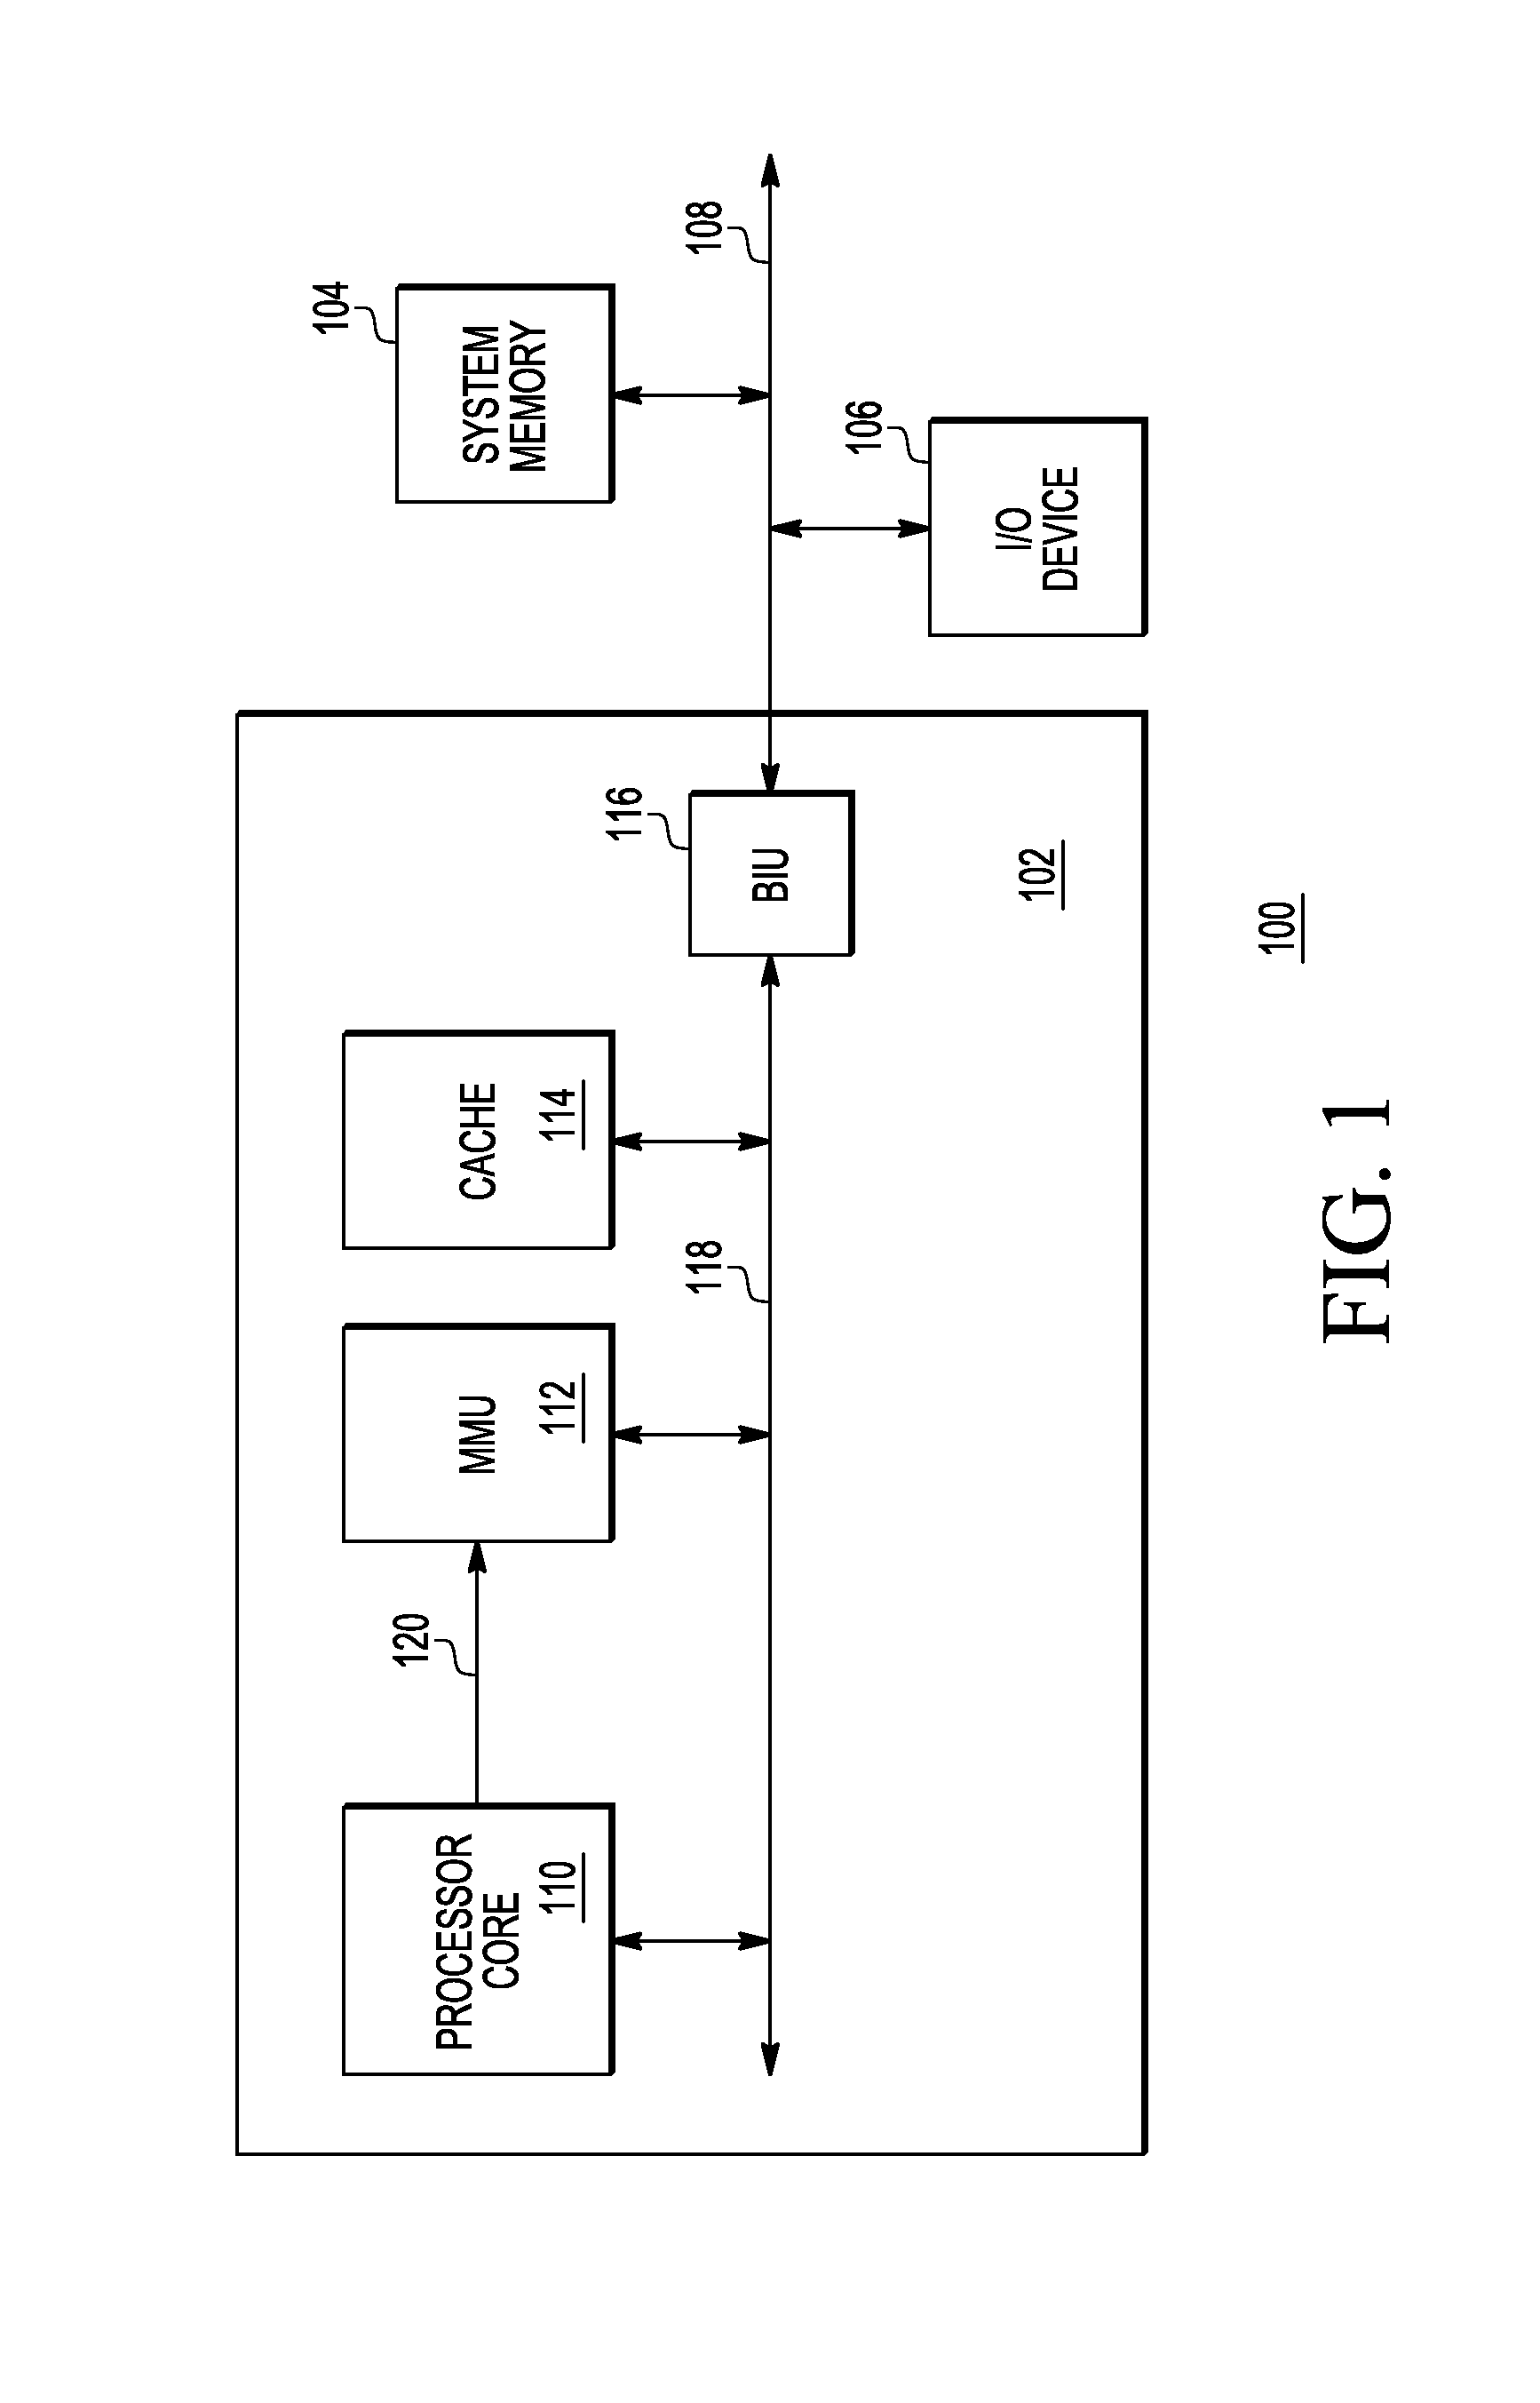 Systems and methods for configuring load/store execution units